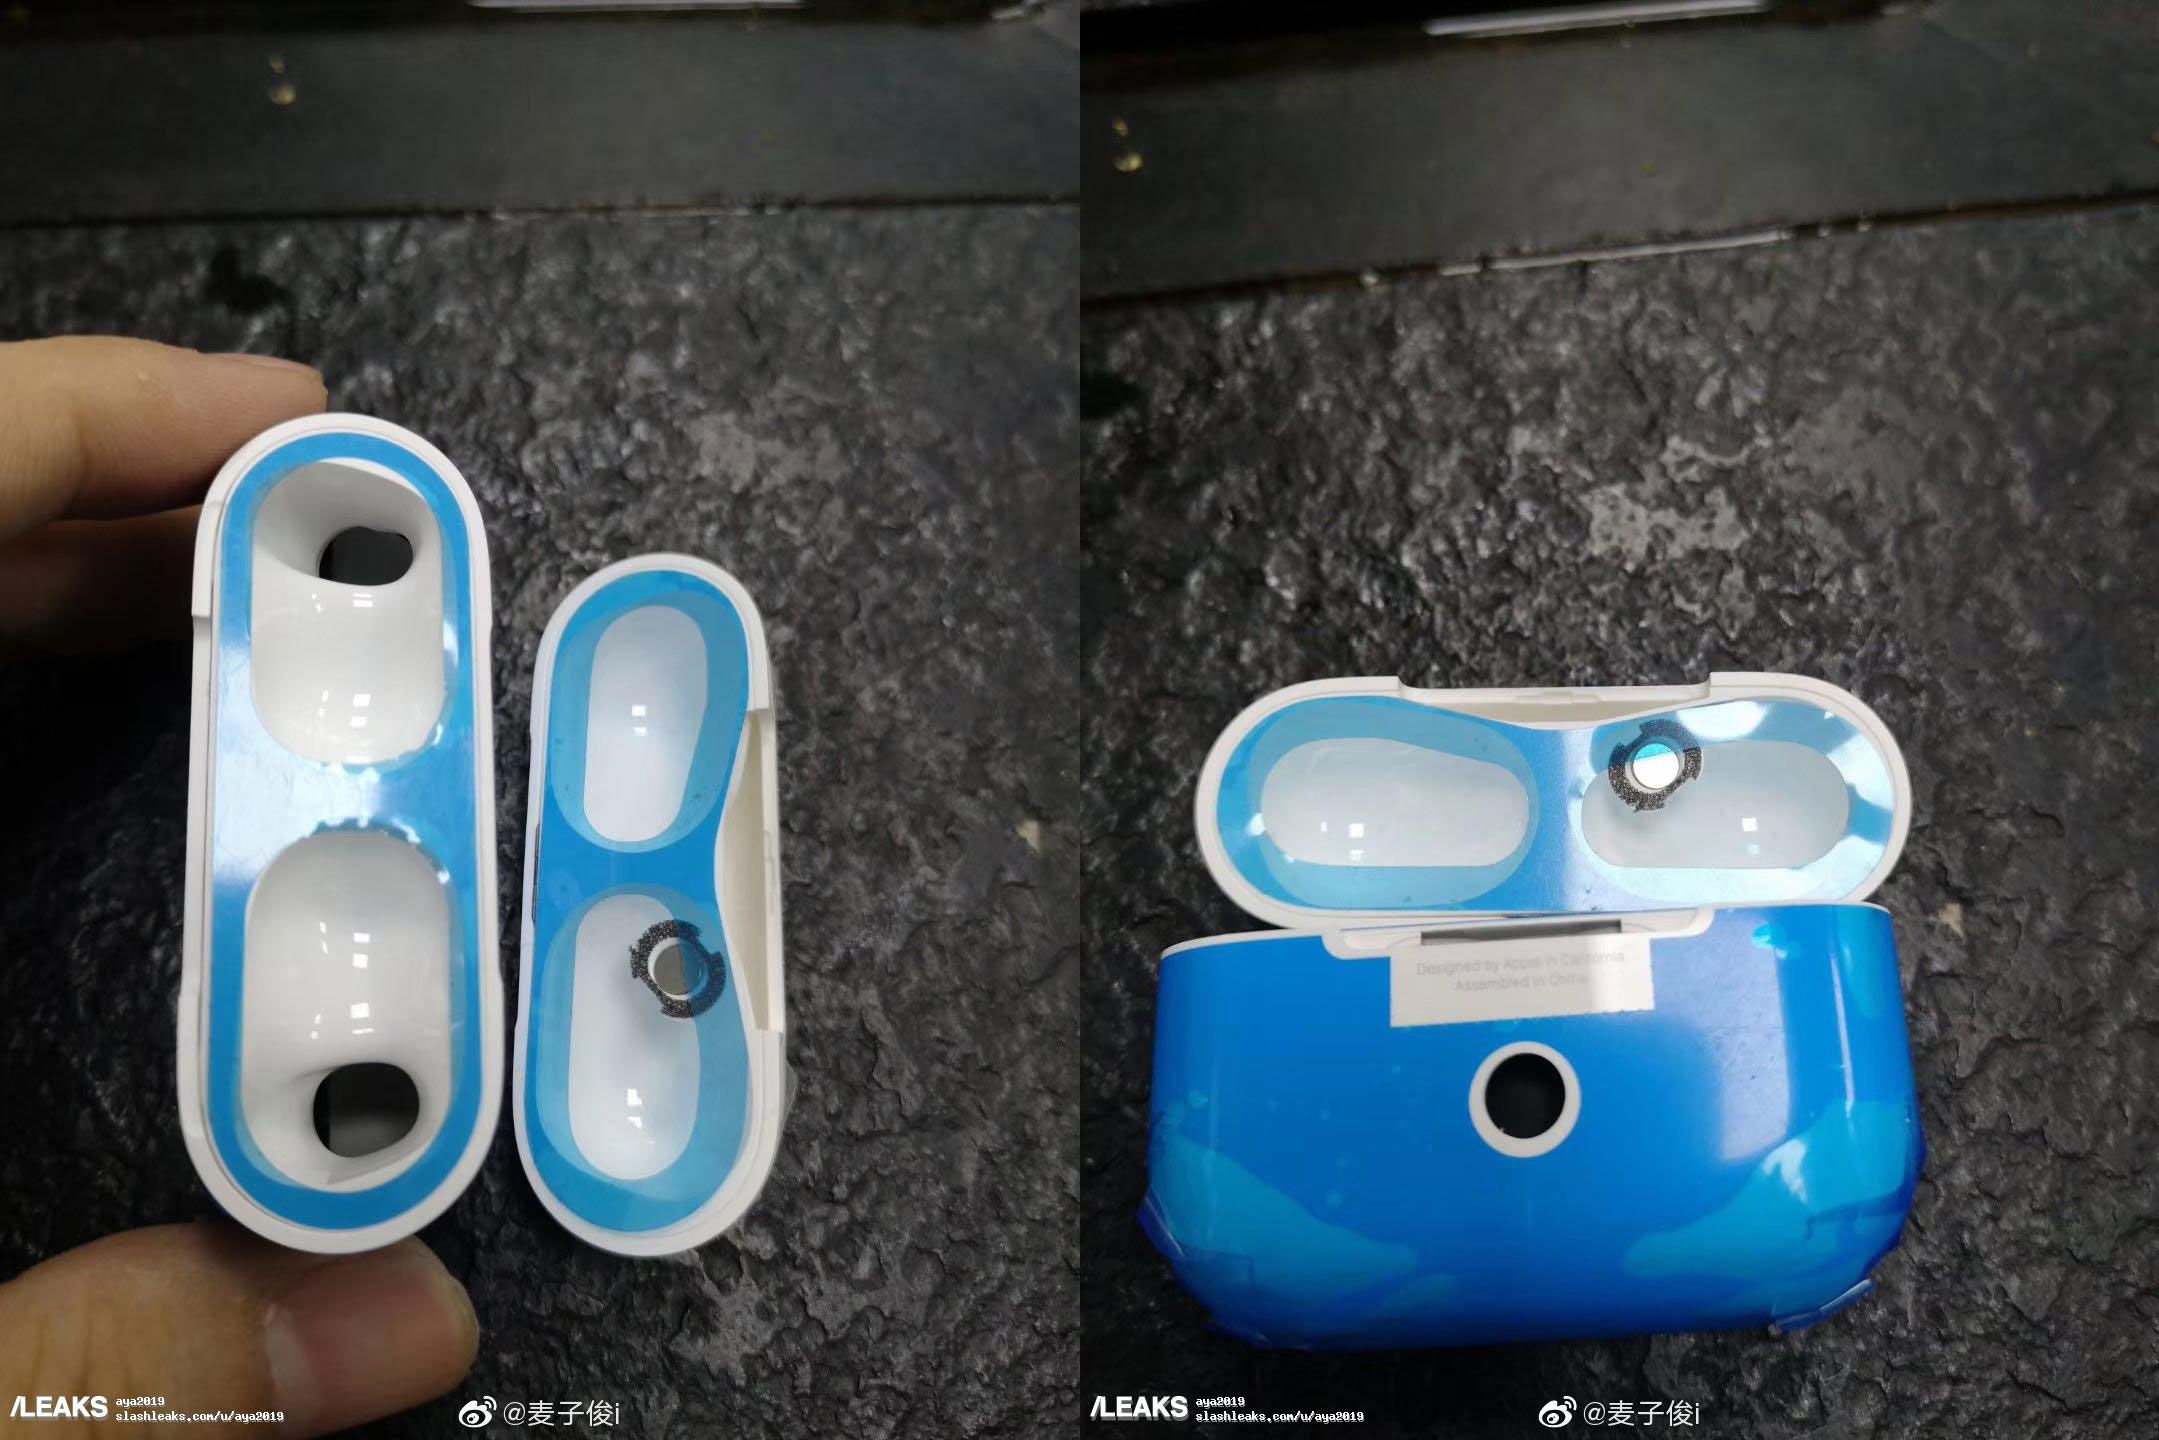 New Images of Rumored AirPods Pro Charging Case [Updated] - MacRumors